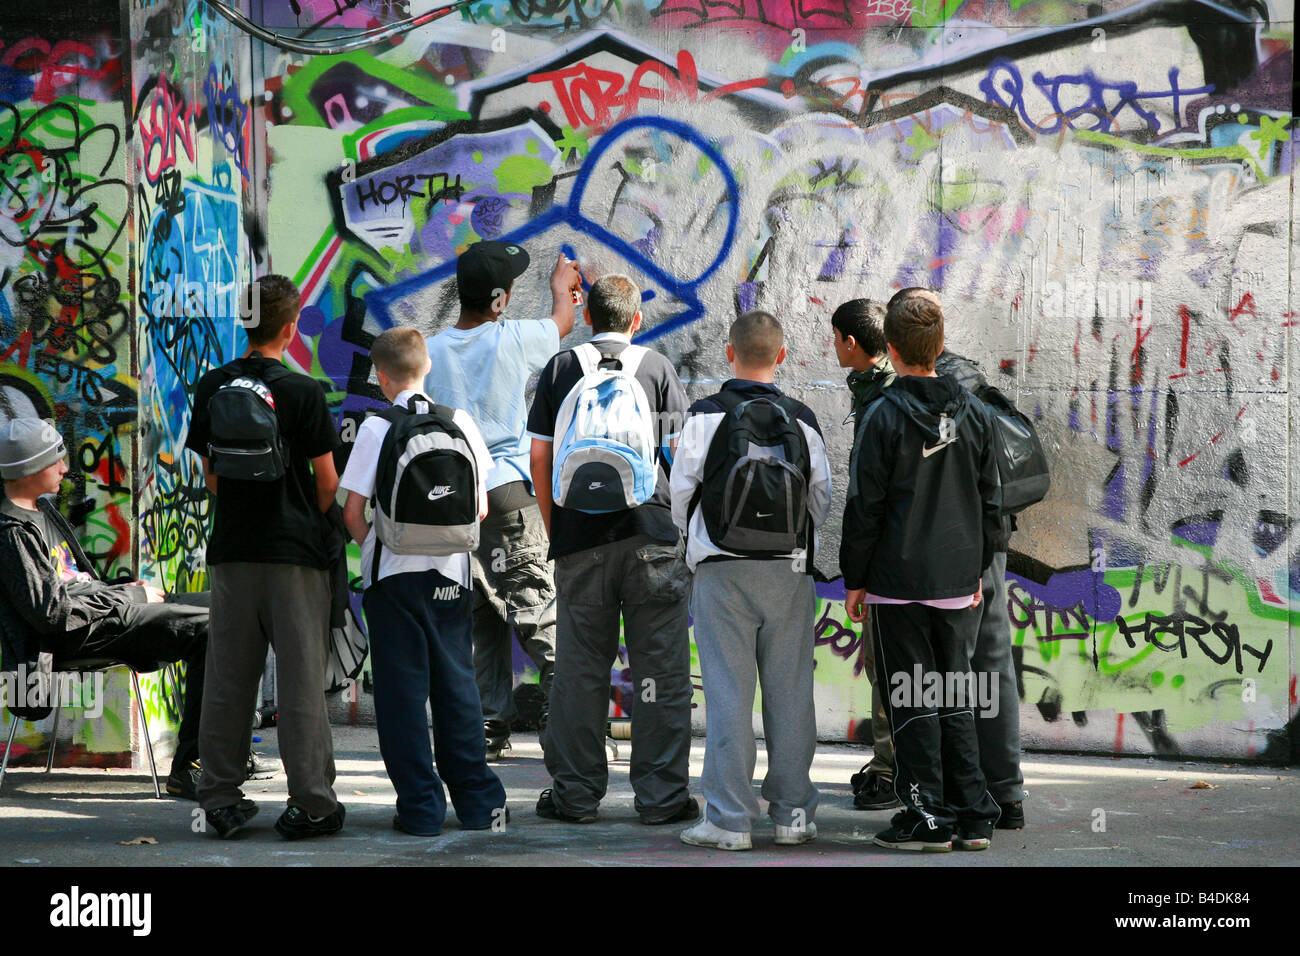 Group of young boys men teenagers hoodies delinquents skaters watch a graffiti artist at work spraying graffiti on a wall London Stock Photo